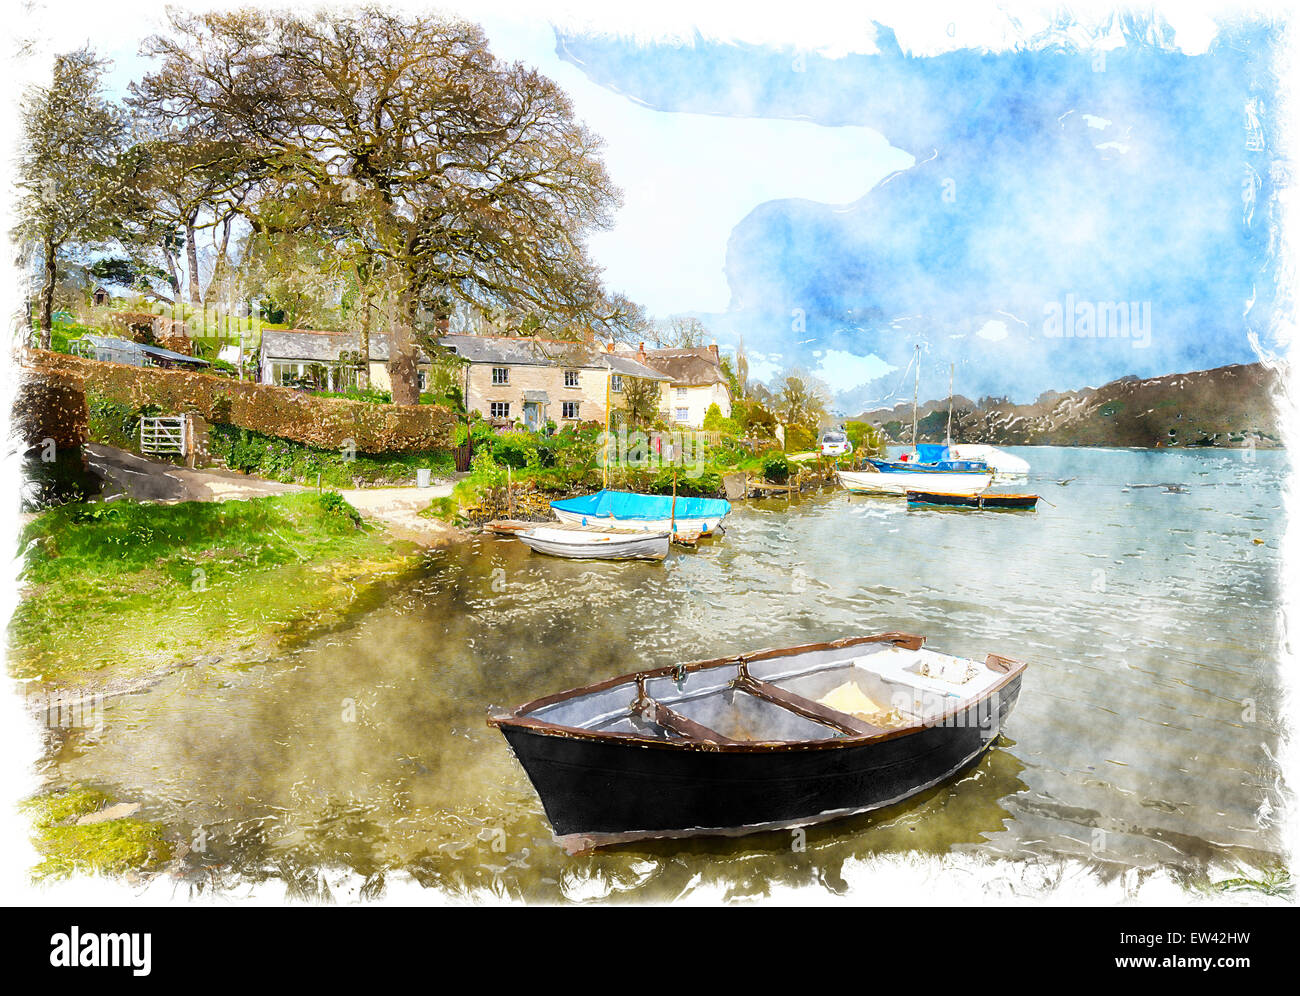 St Clement a small village on the banks of the Tresillian river just outside of Truro in Cornwall Stock Photo